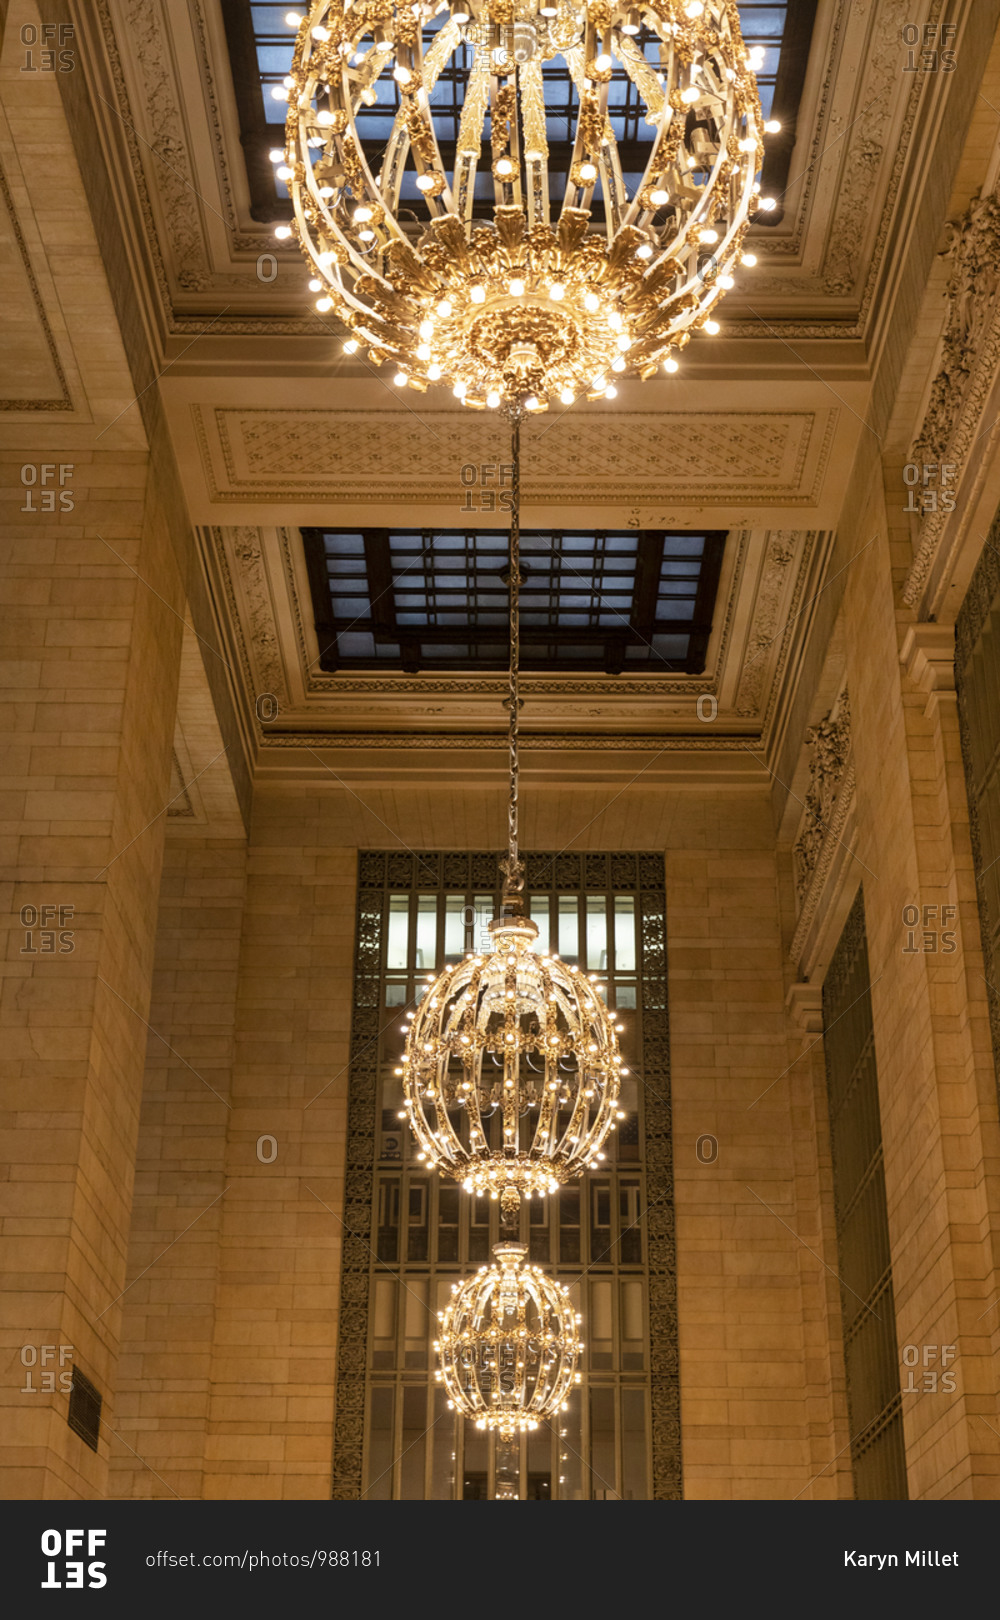 Low angle view of a row of chandeliers in Grand Central Station in Manhattan, New York City